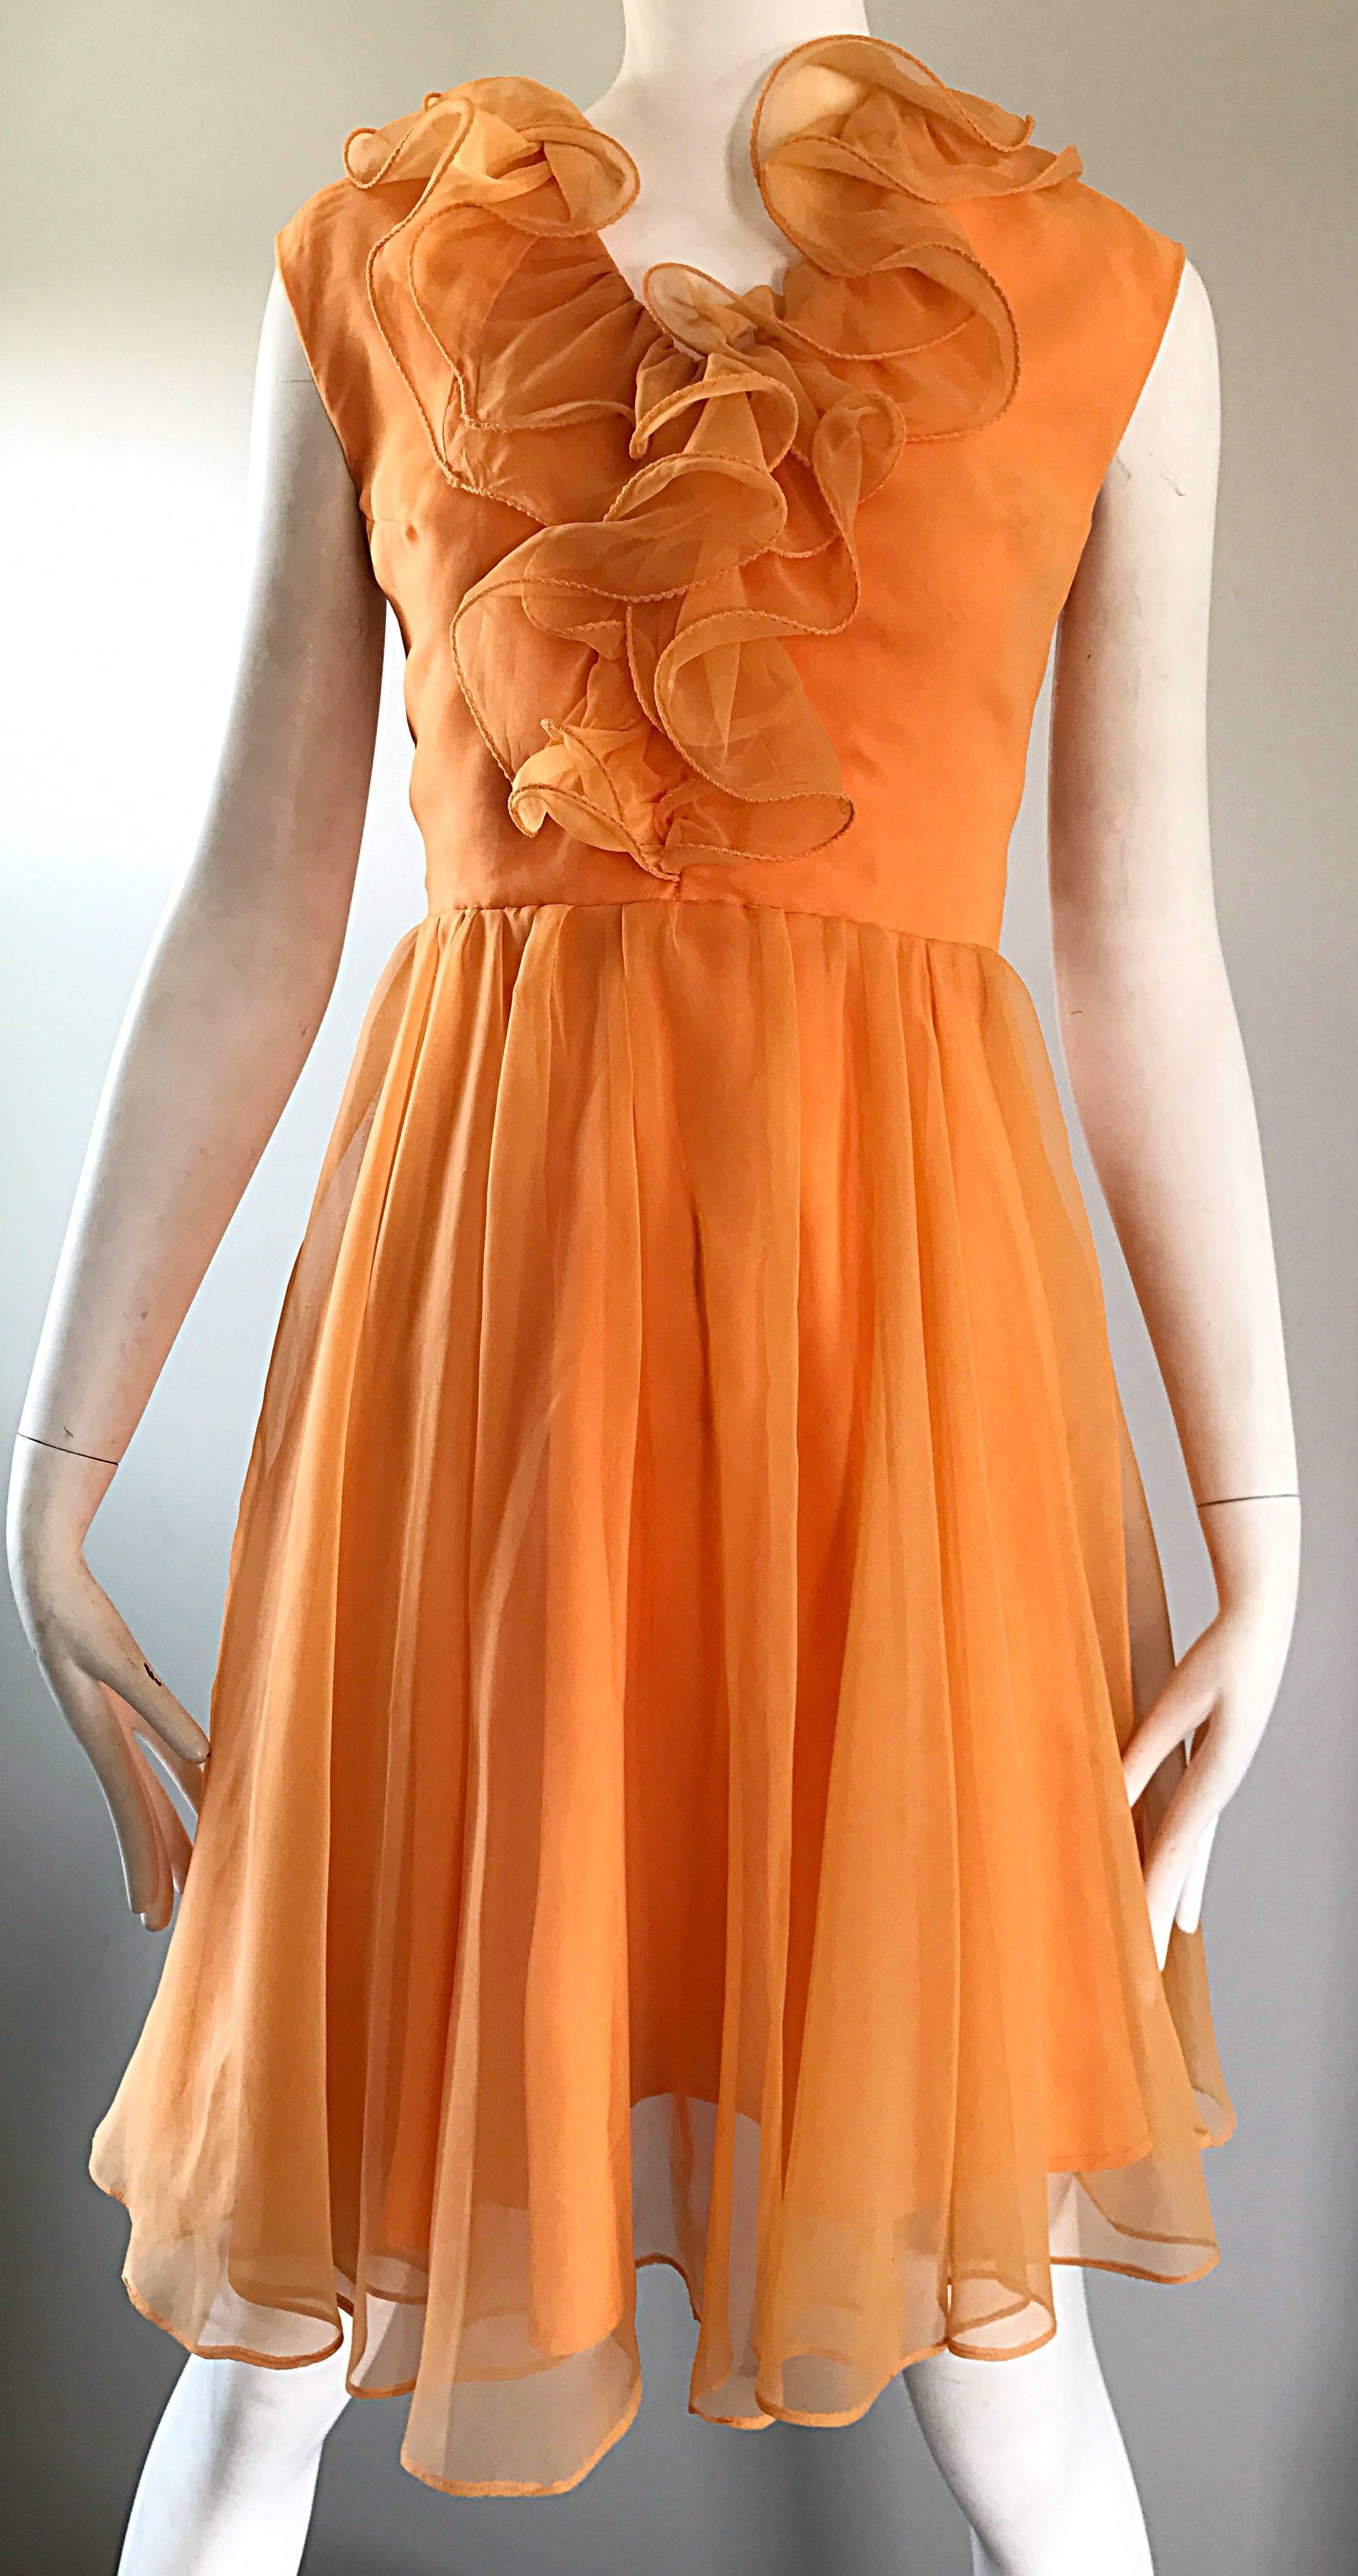 1960s Chic Sorbert Orange Chiffon Ruffle Neck Vintage A - Line 60s Dress  In Excellent Condition For Sale In San Diego, CA